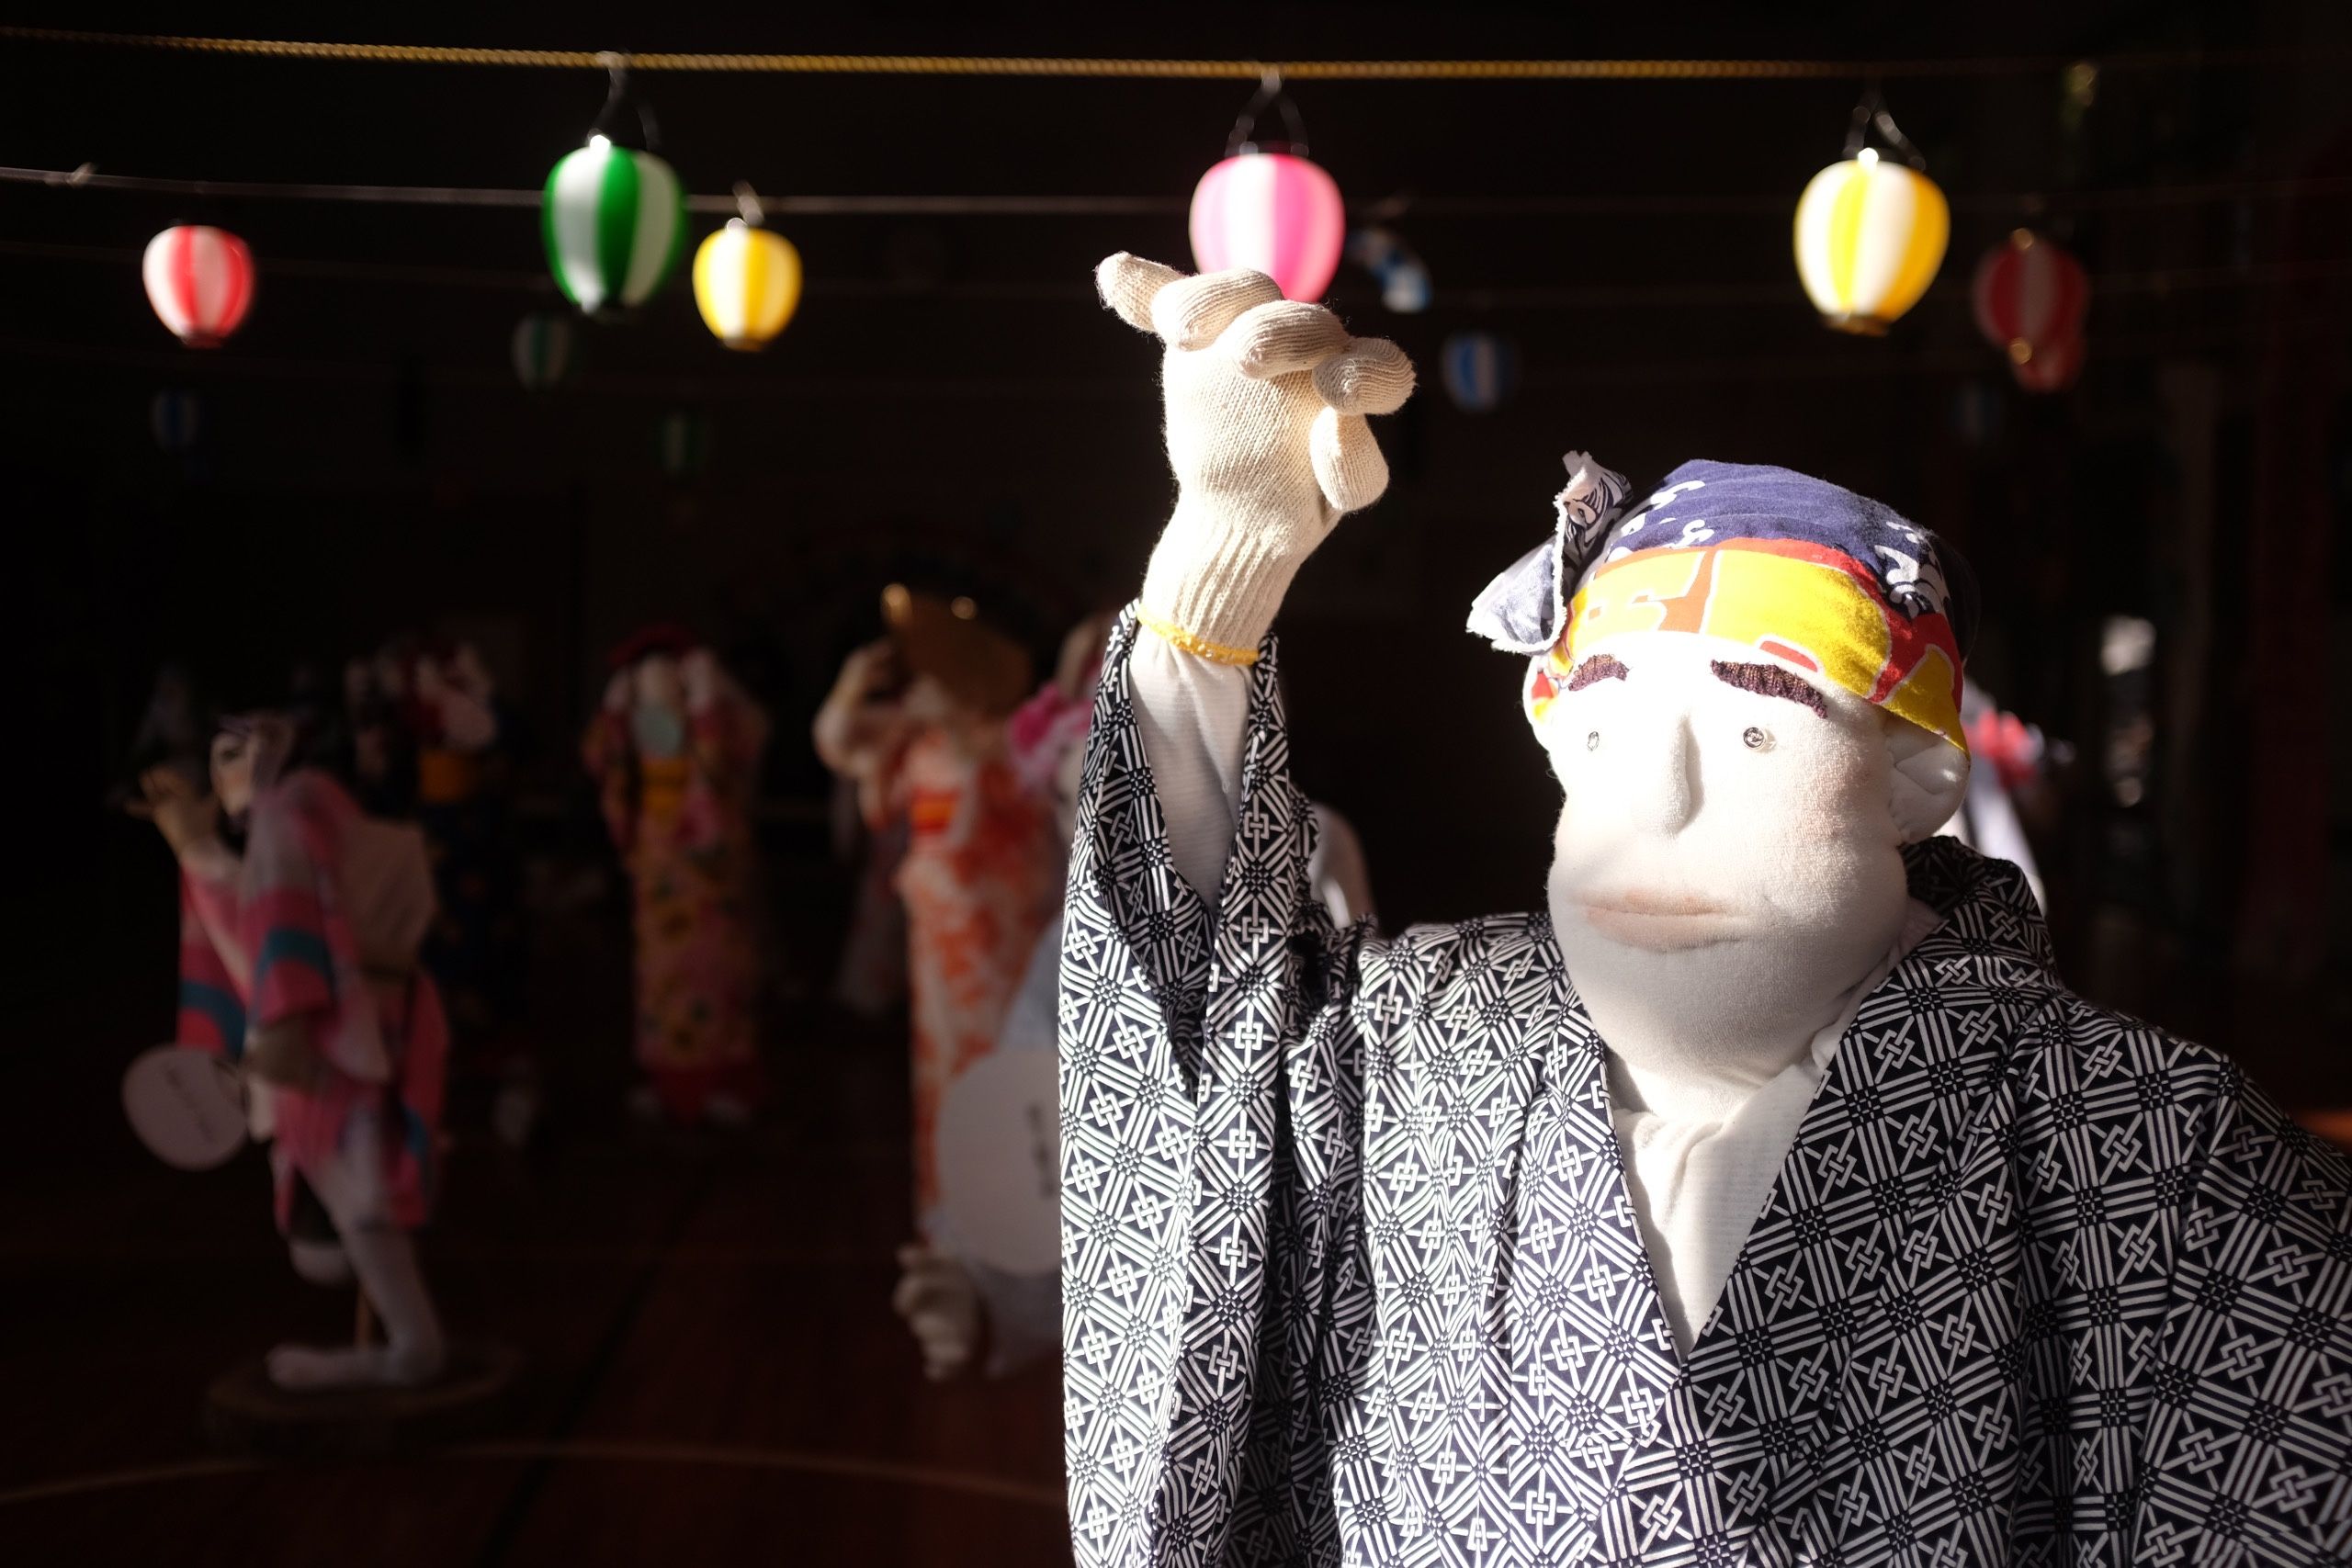 Another doll in a Japanese summer kimono stands in a gymnasium, with other dolls in the background.